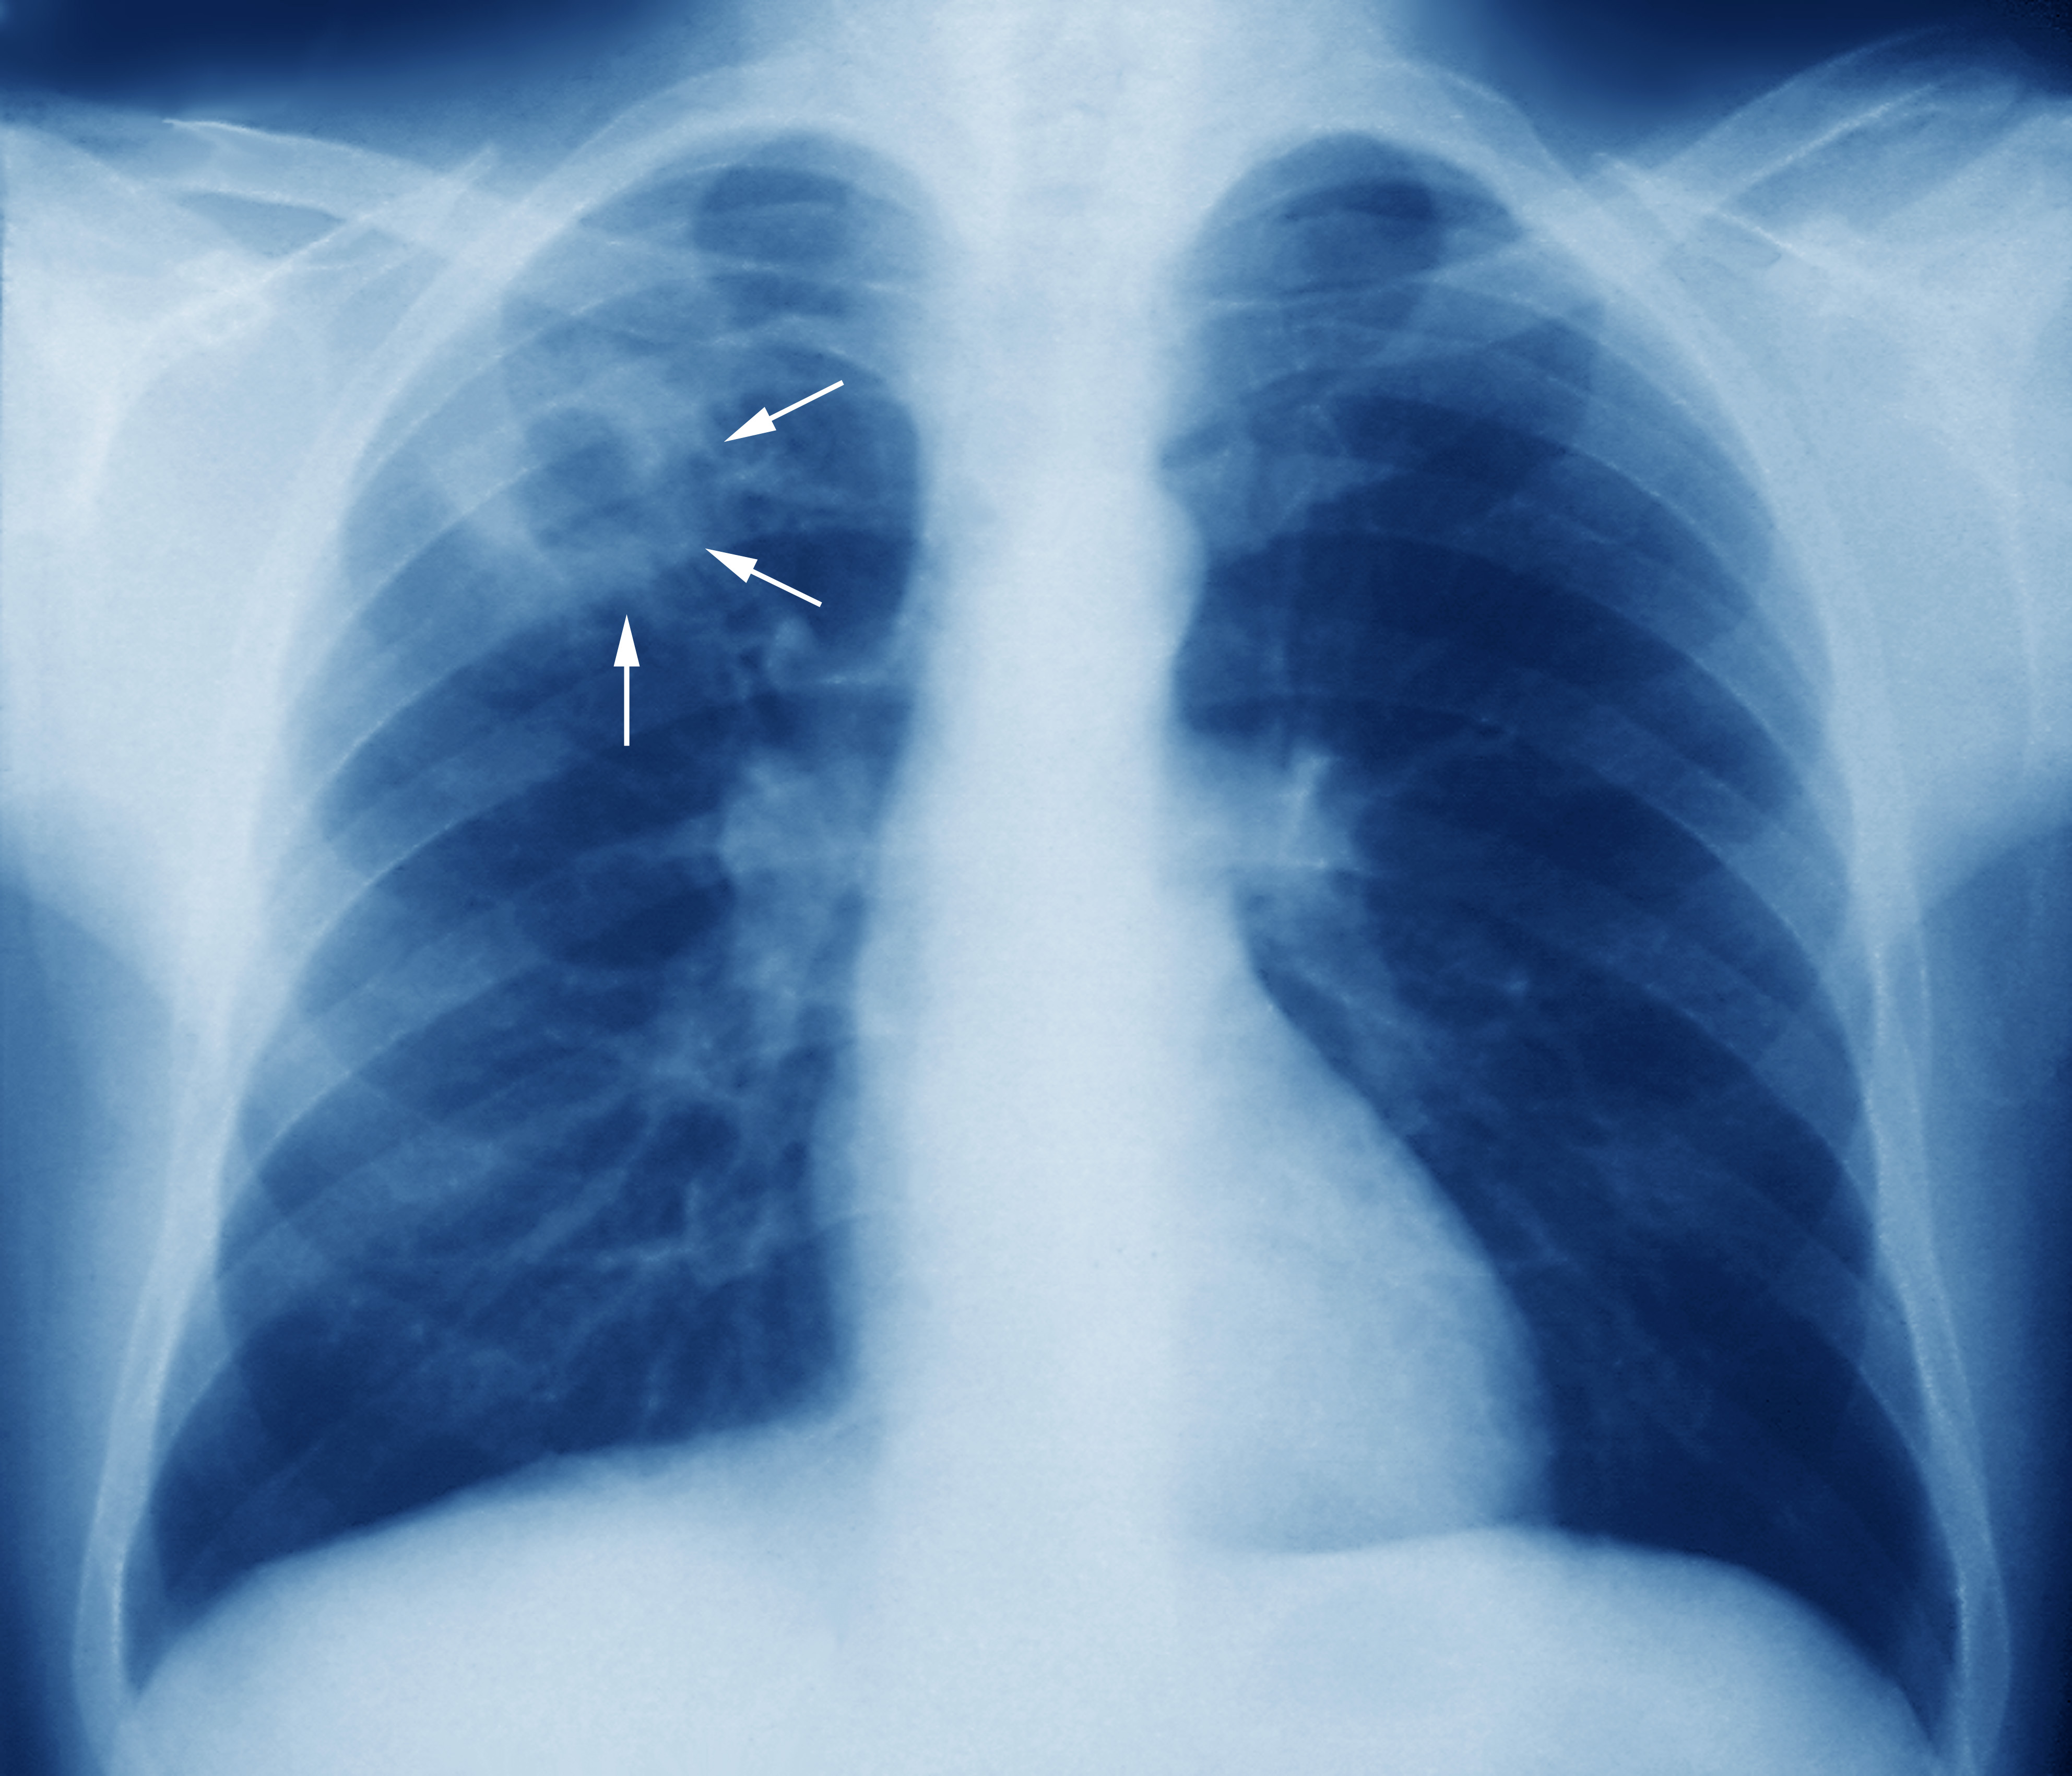 http://medcz.com/wp-content/uploads/2020/12/m2700245-tuberculosis-chest-x-ray-science-photo-library-high.jpg